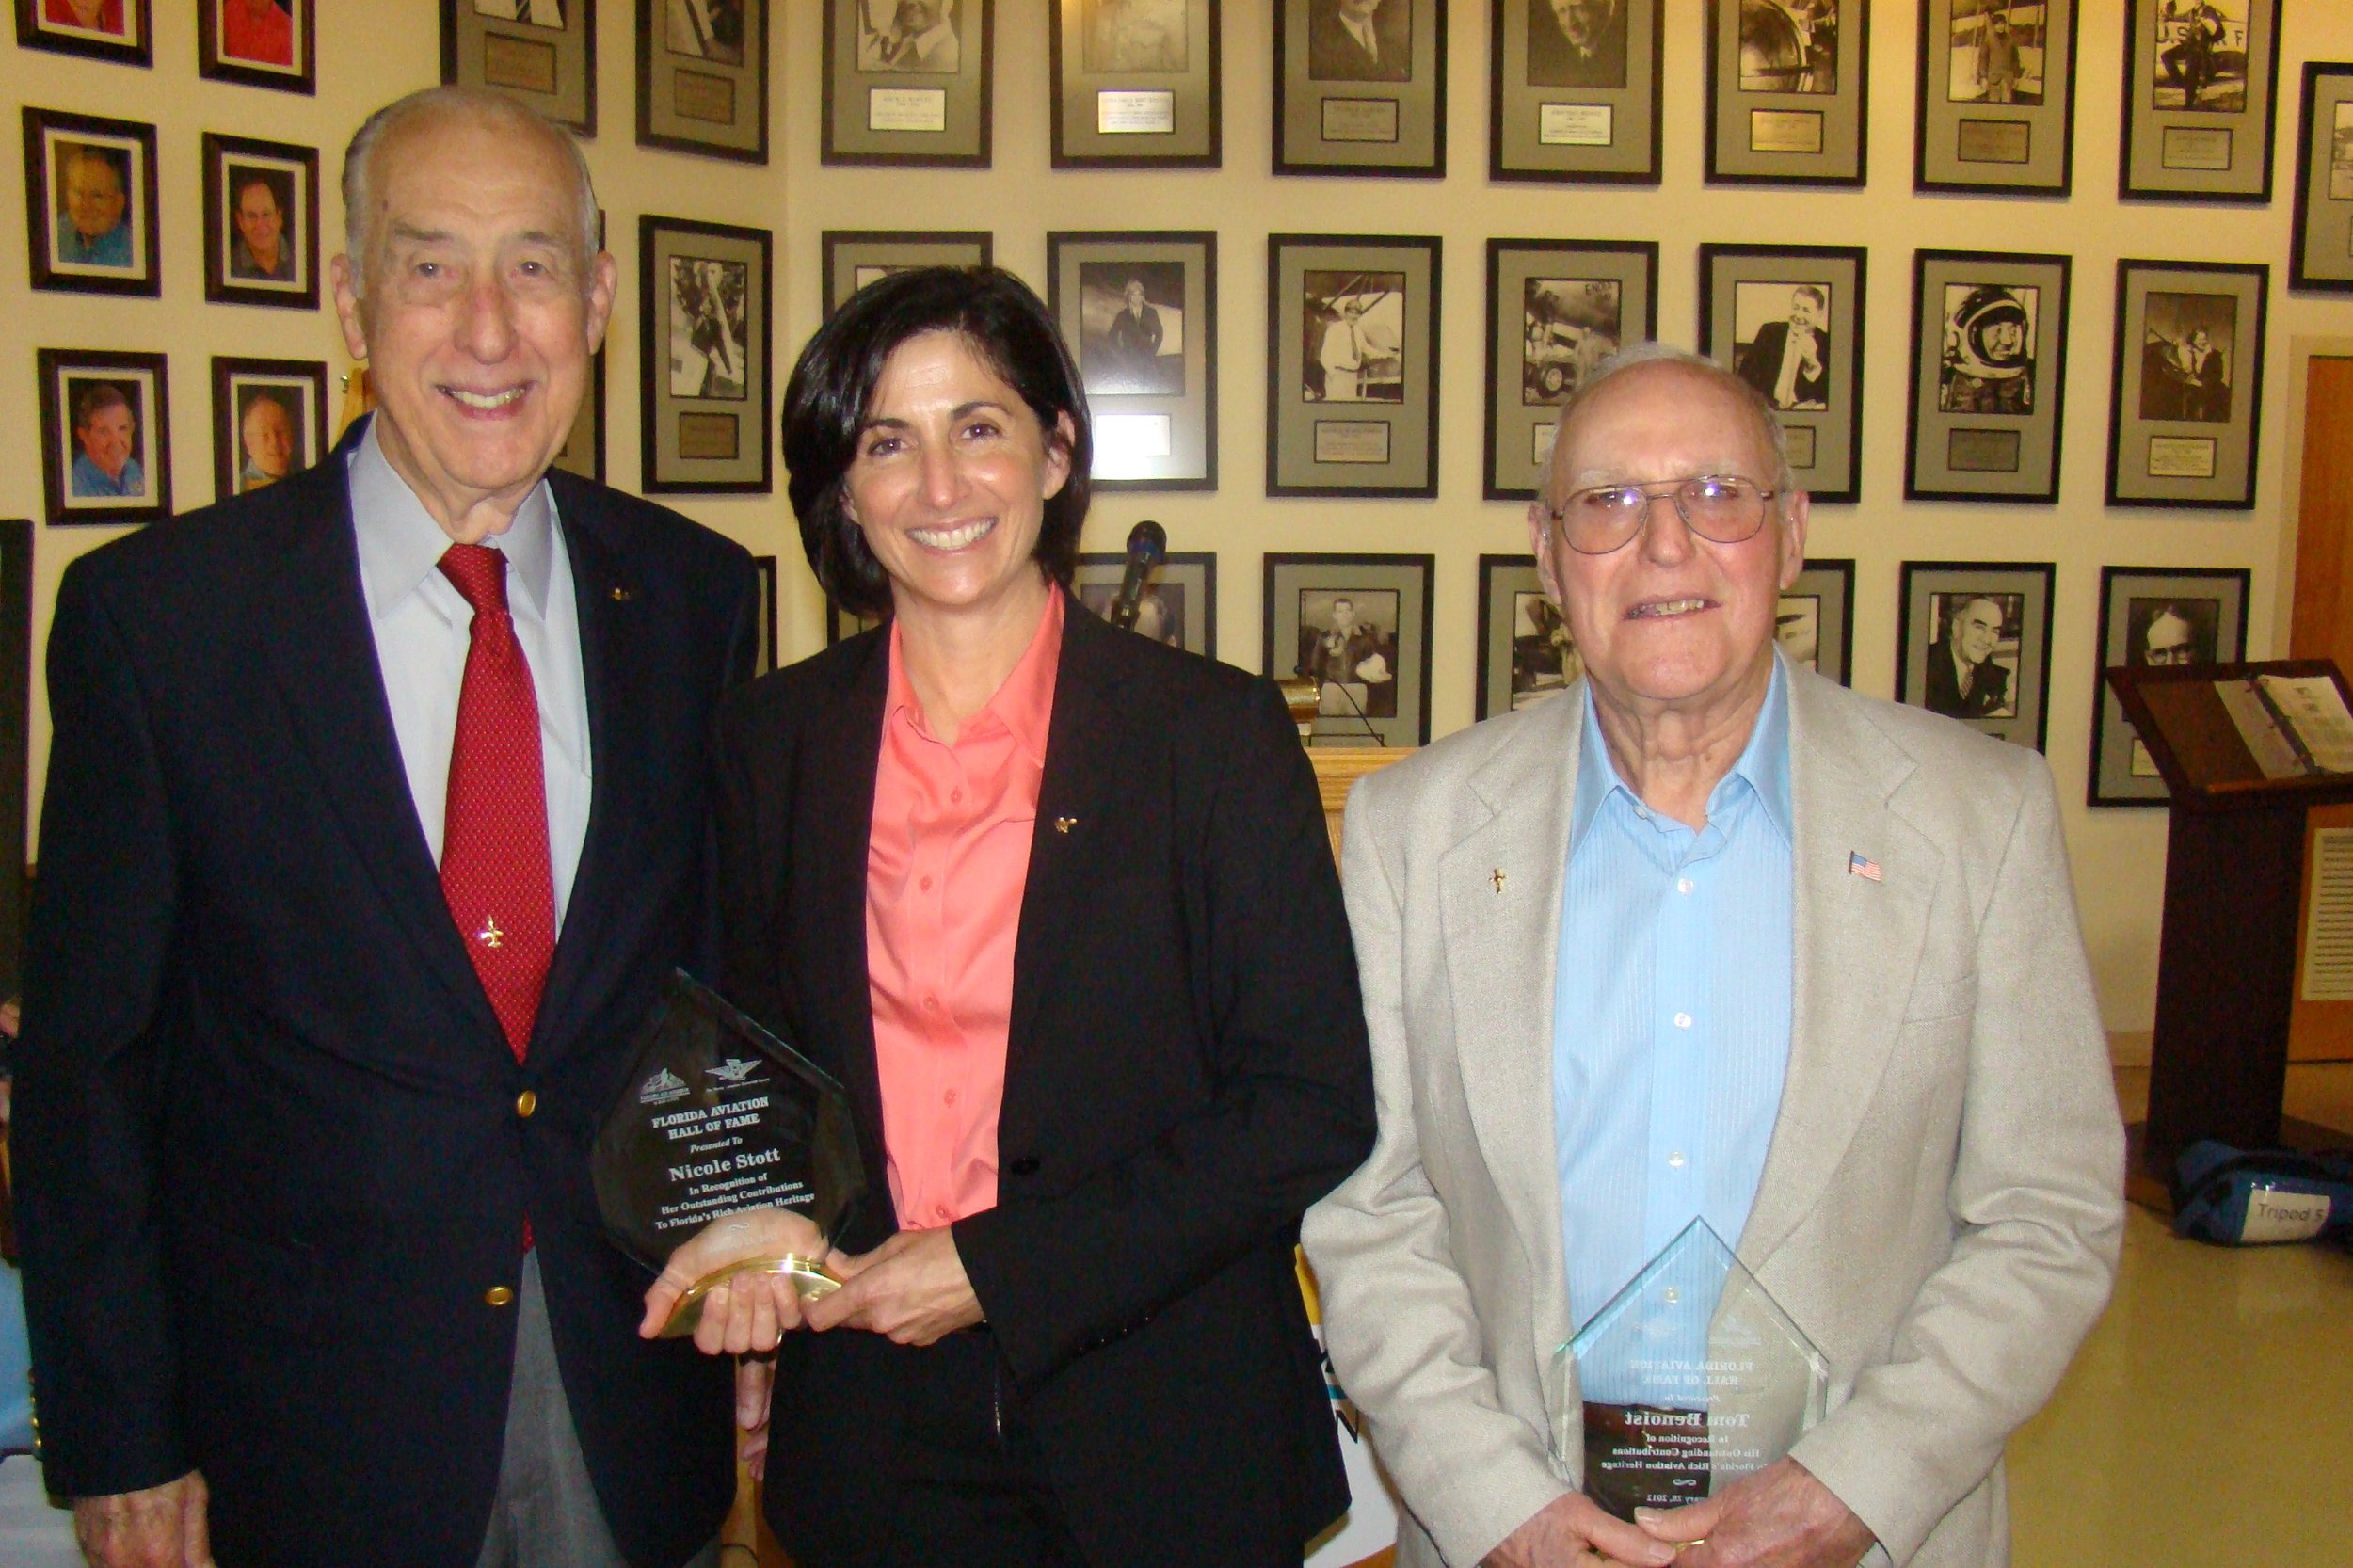 Dick Newton with Nicole Stott and Nephew of Thomas W. Benoist after FAHOF Induction Ceremony, 28 Jan '12.JPG